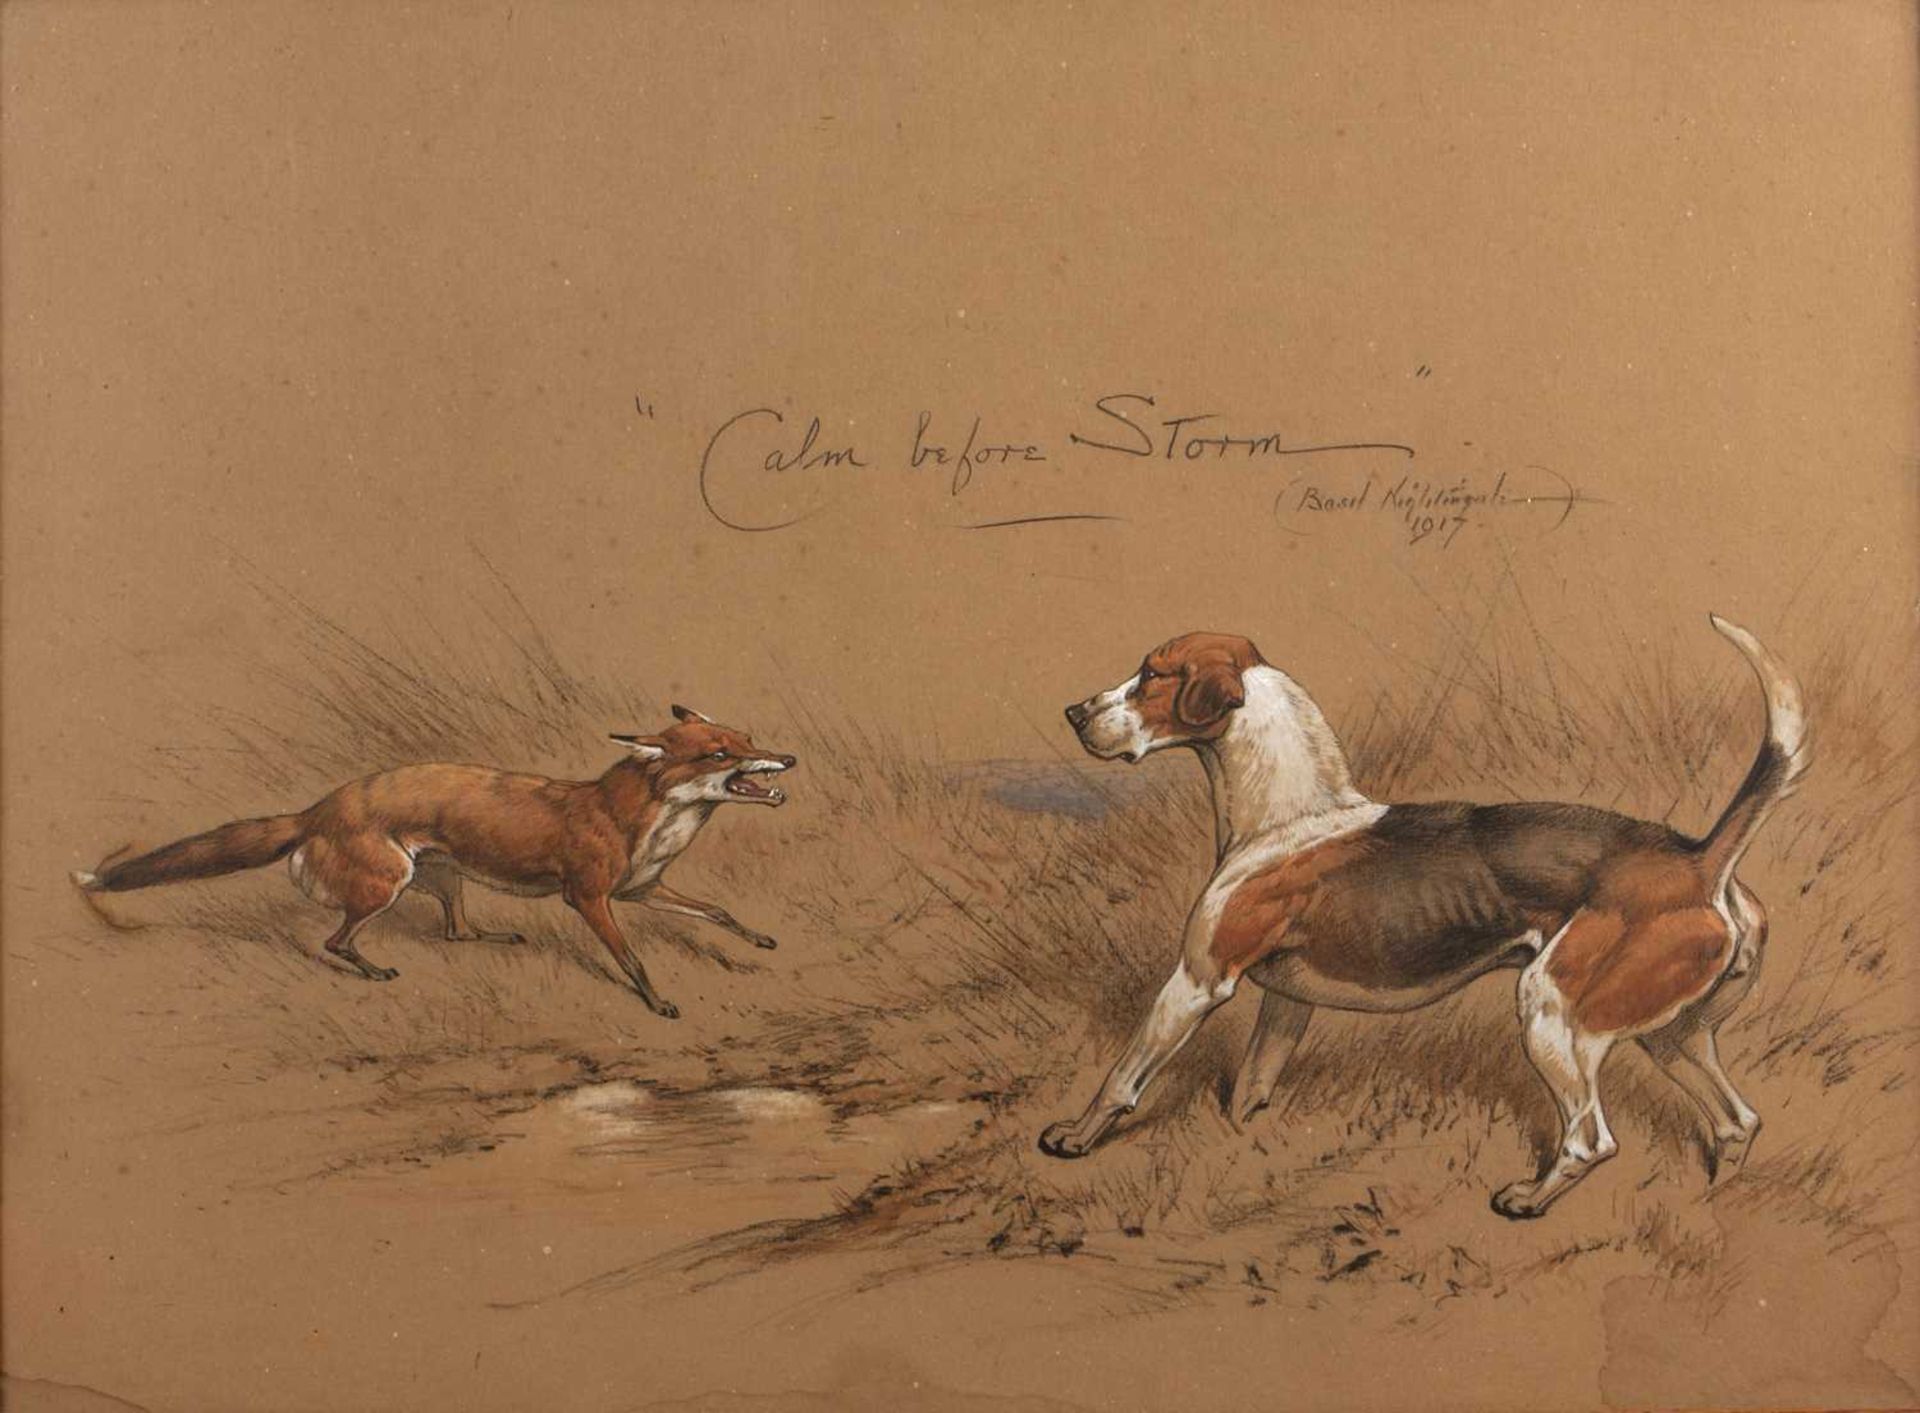 Basil Nightingale (1864-1940) 'Calm before the storm' study of a fox and hound, graphite and gouache